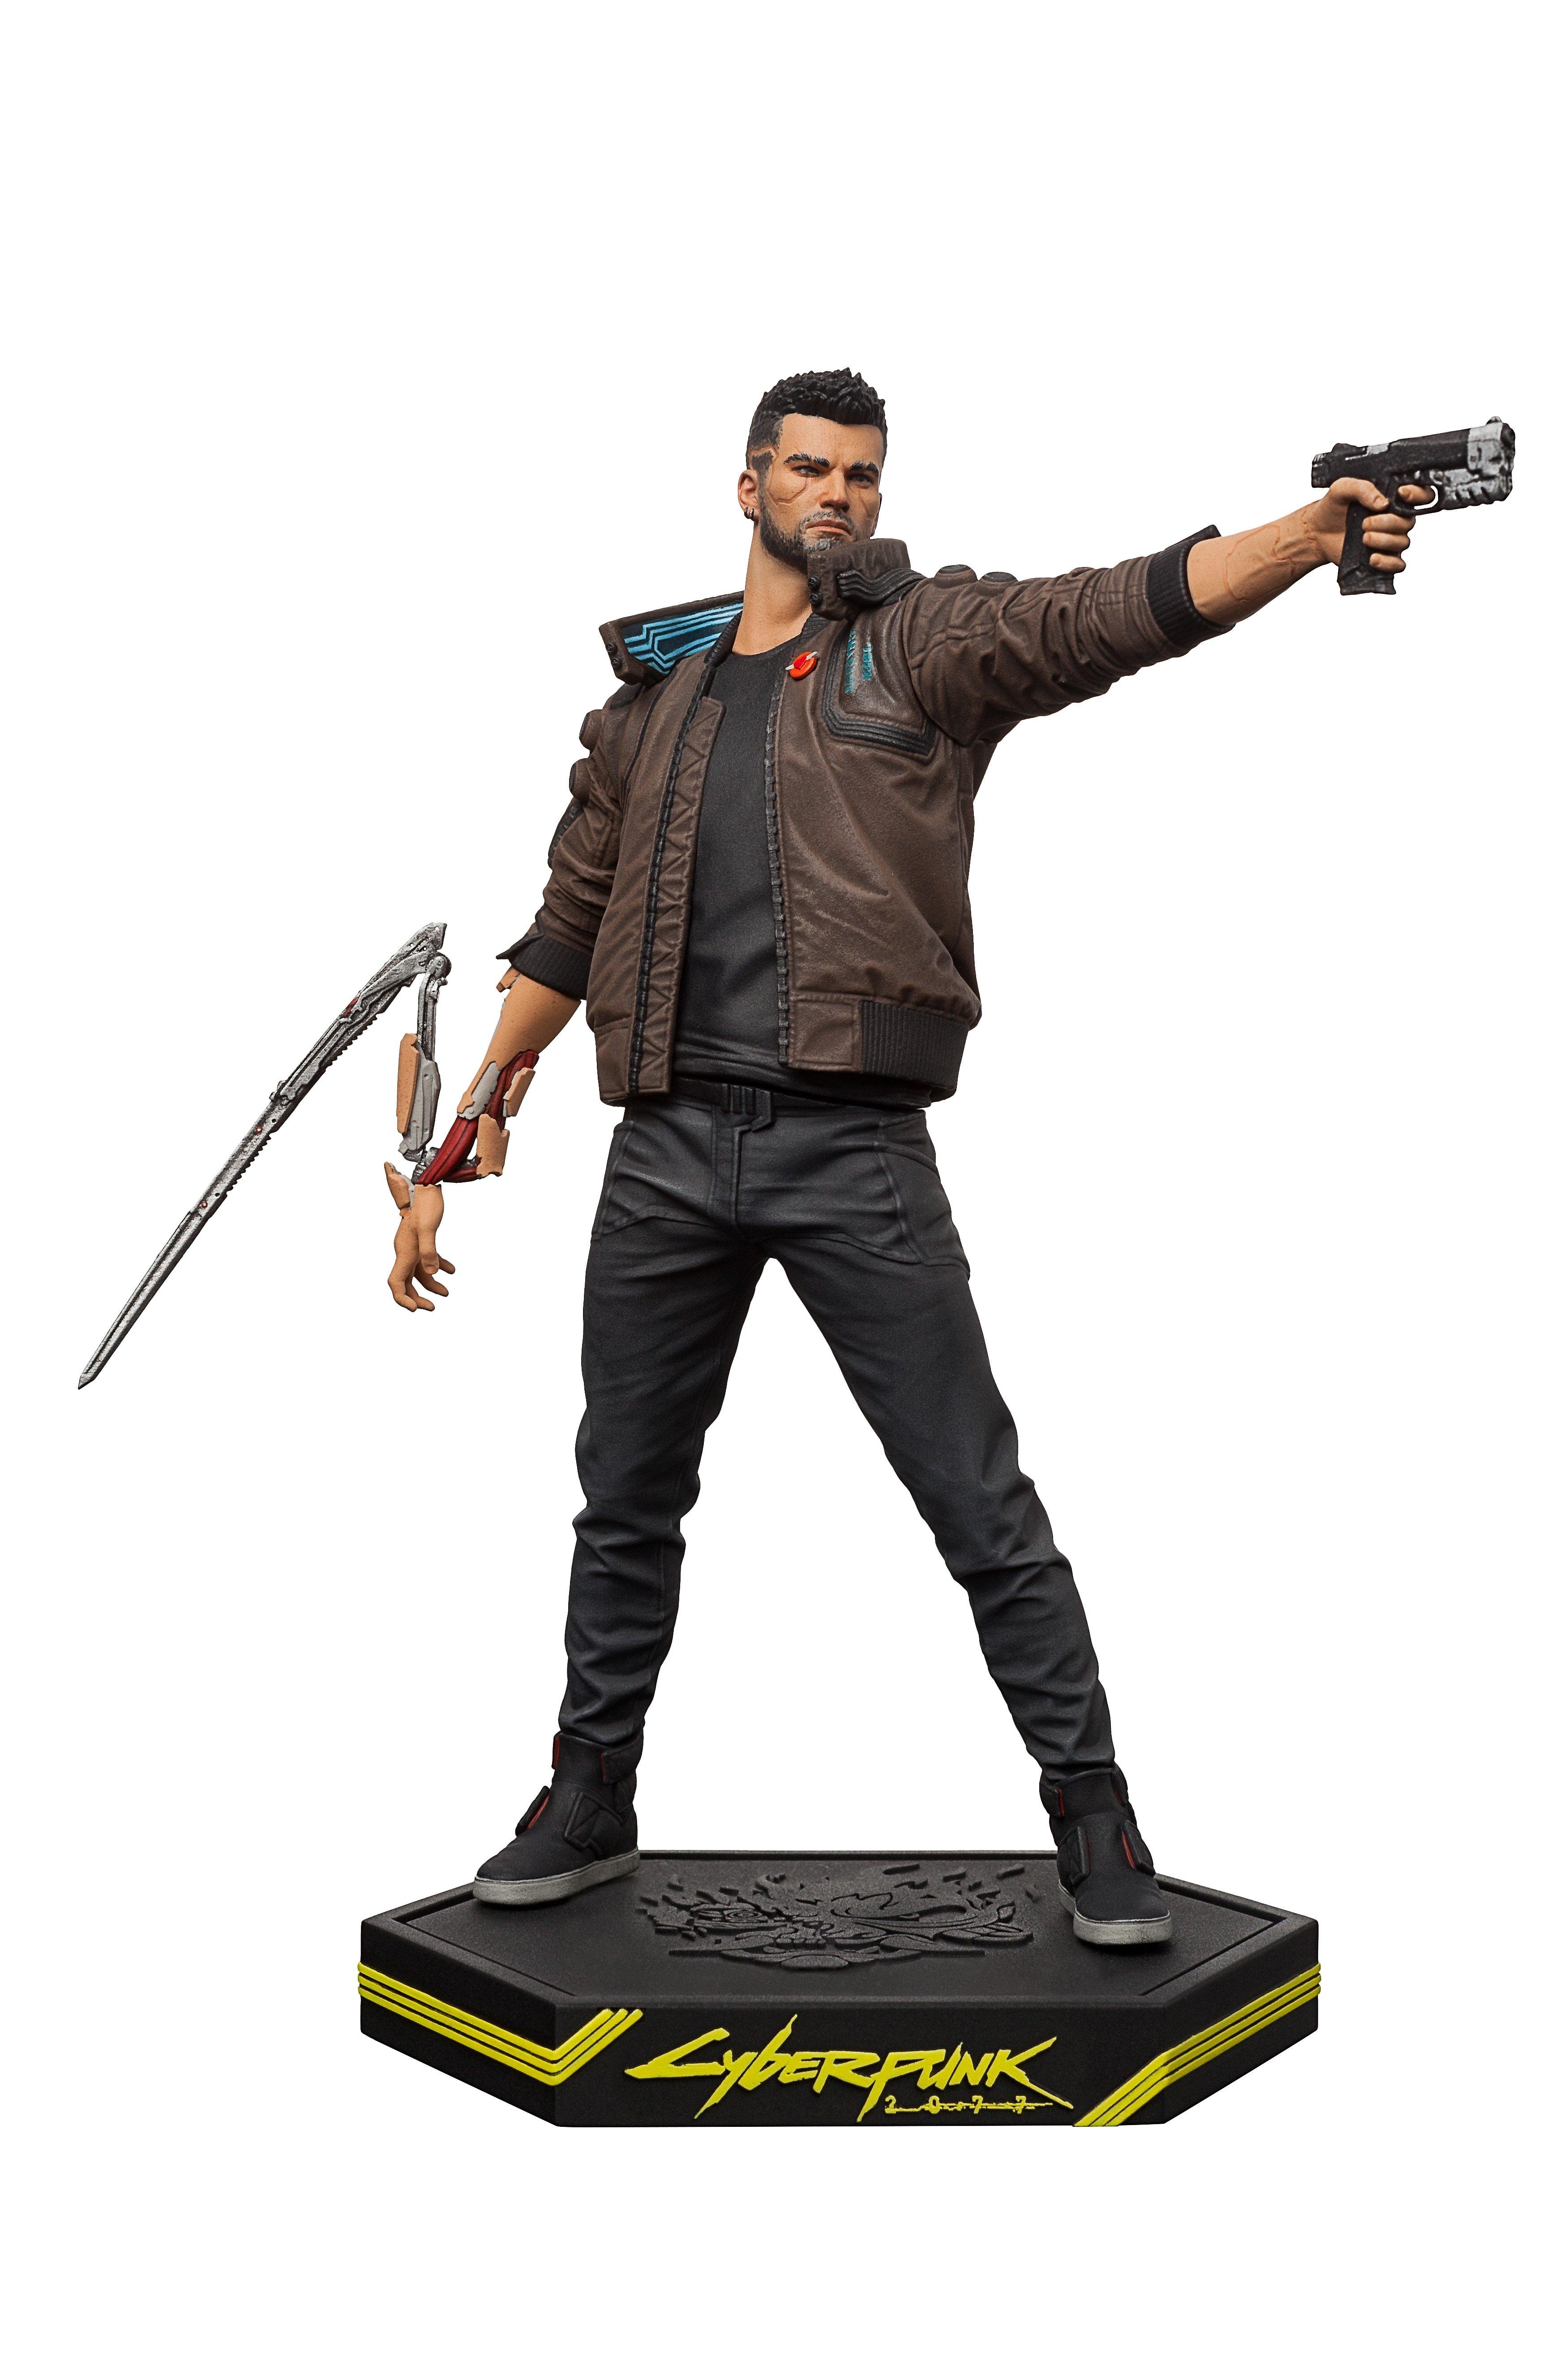 gamestop collectible statues